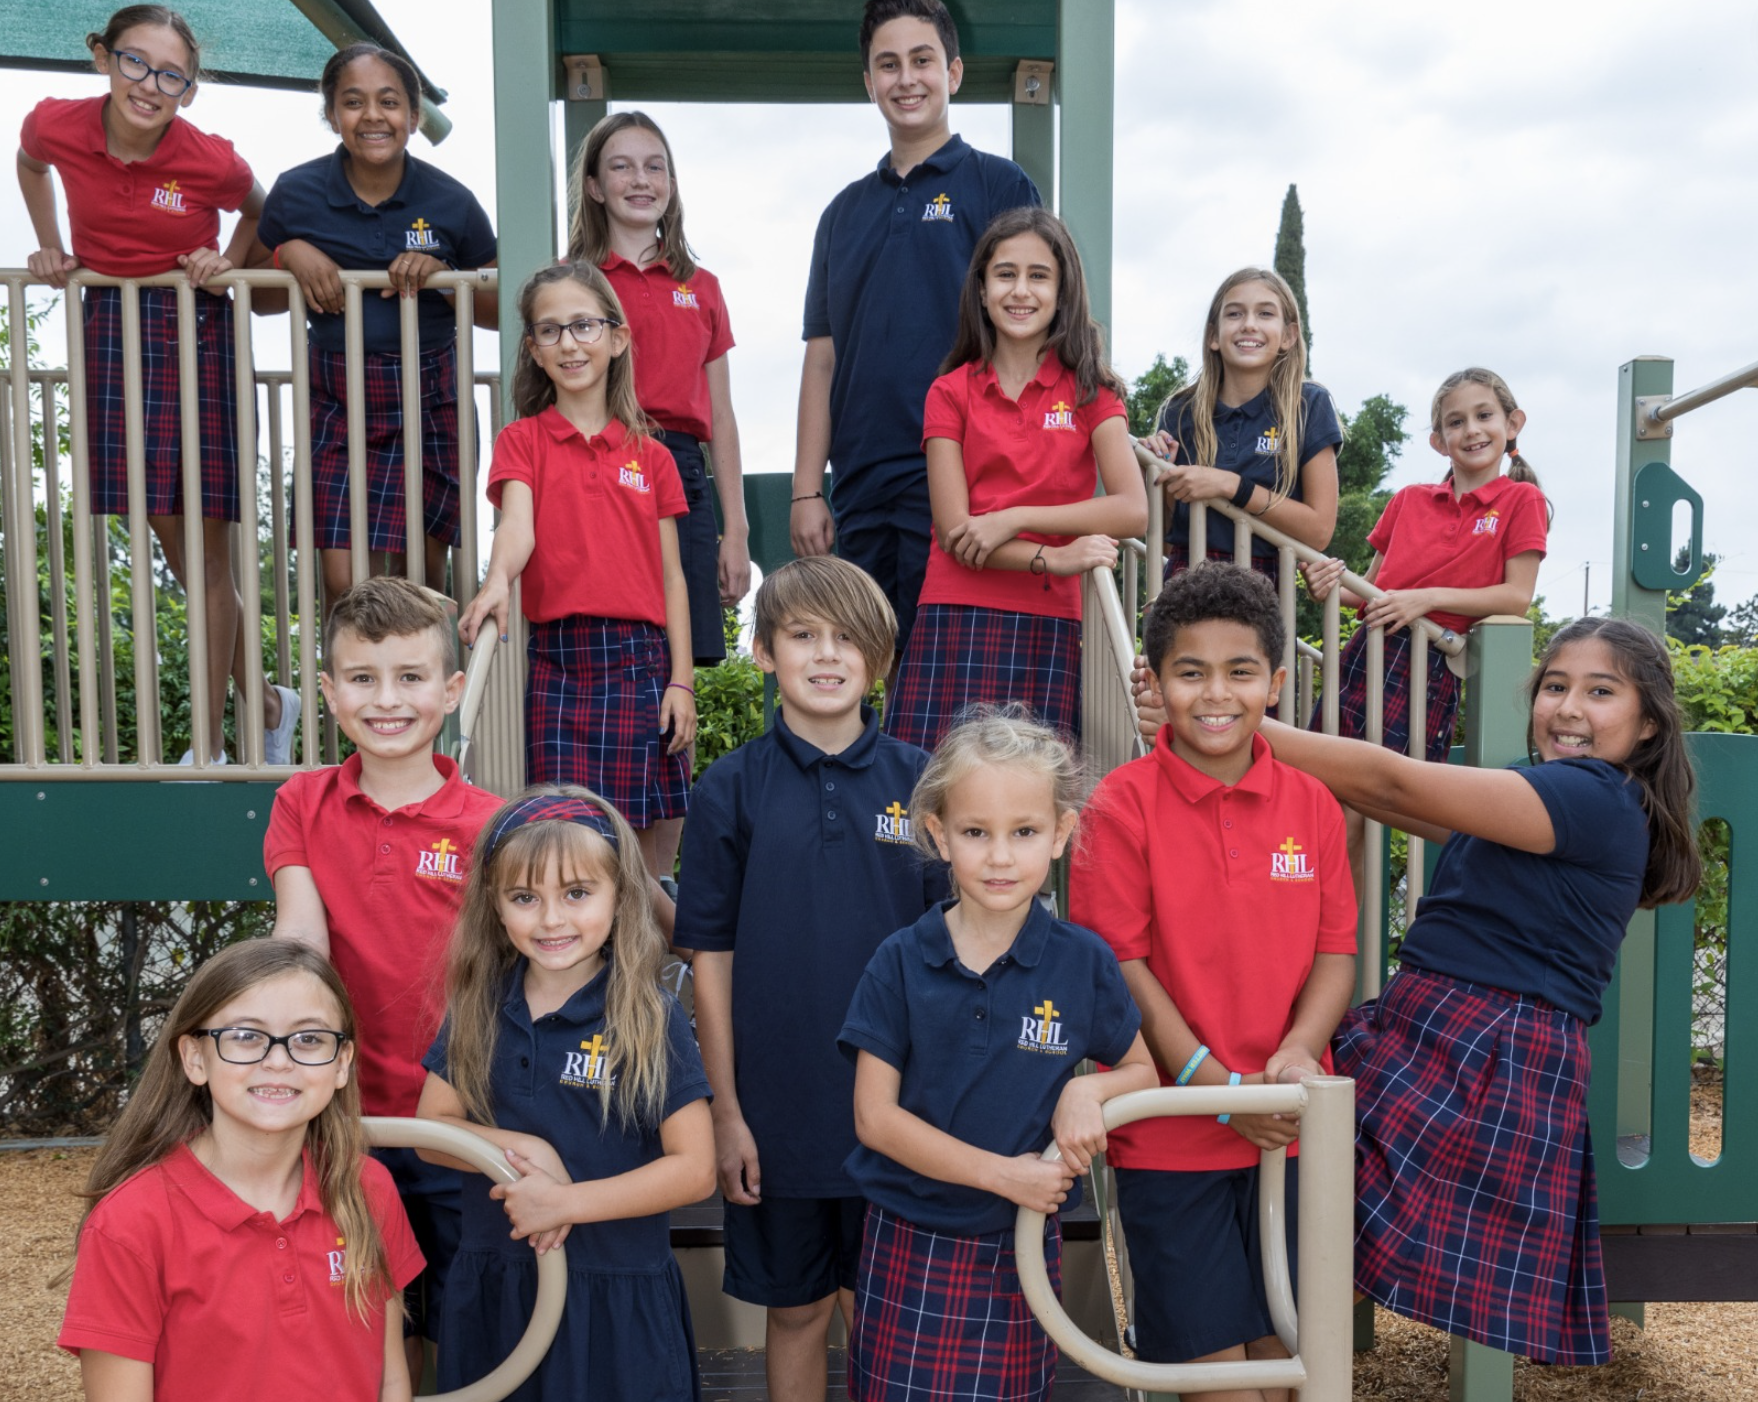 Students in uniform posing on a playground for a picture at Red Hill Lutheran Best Faith-Based School